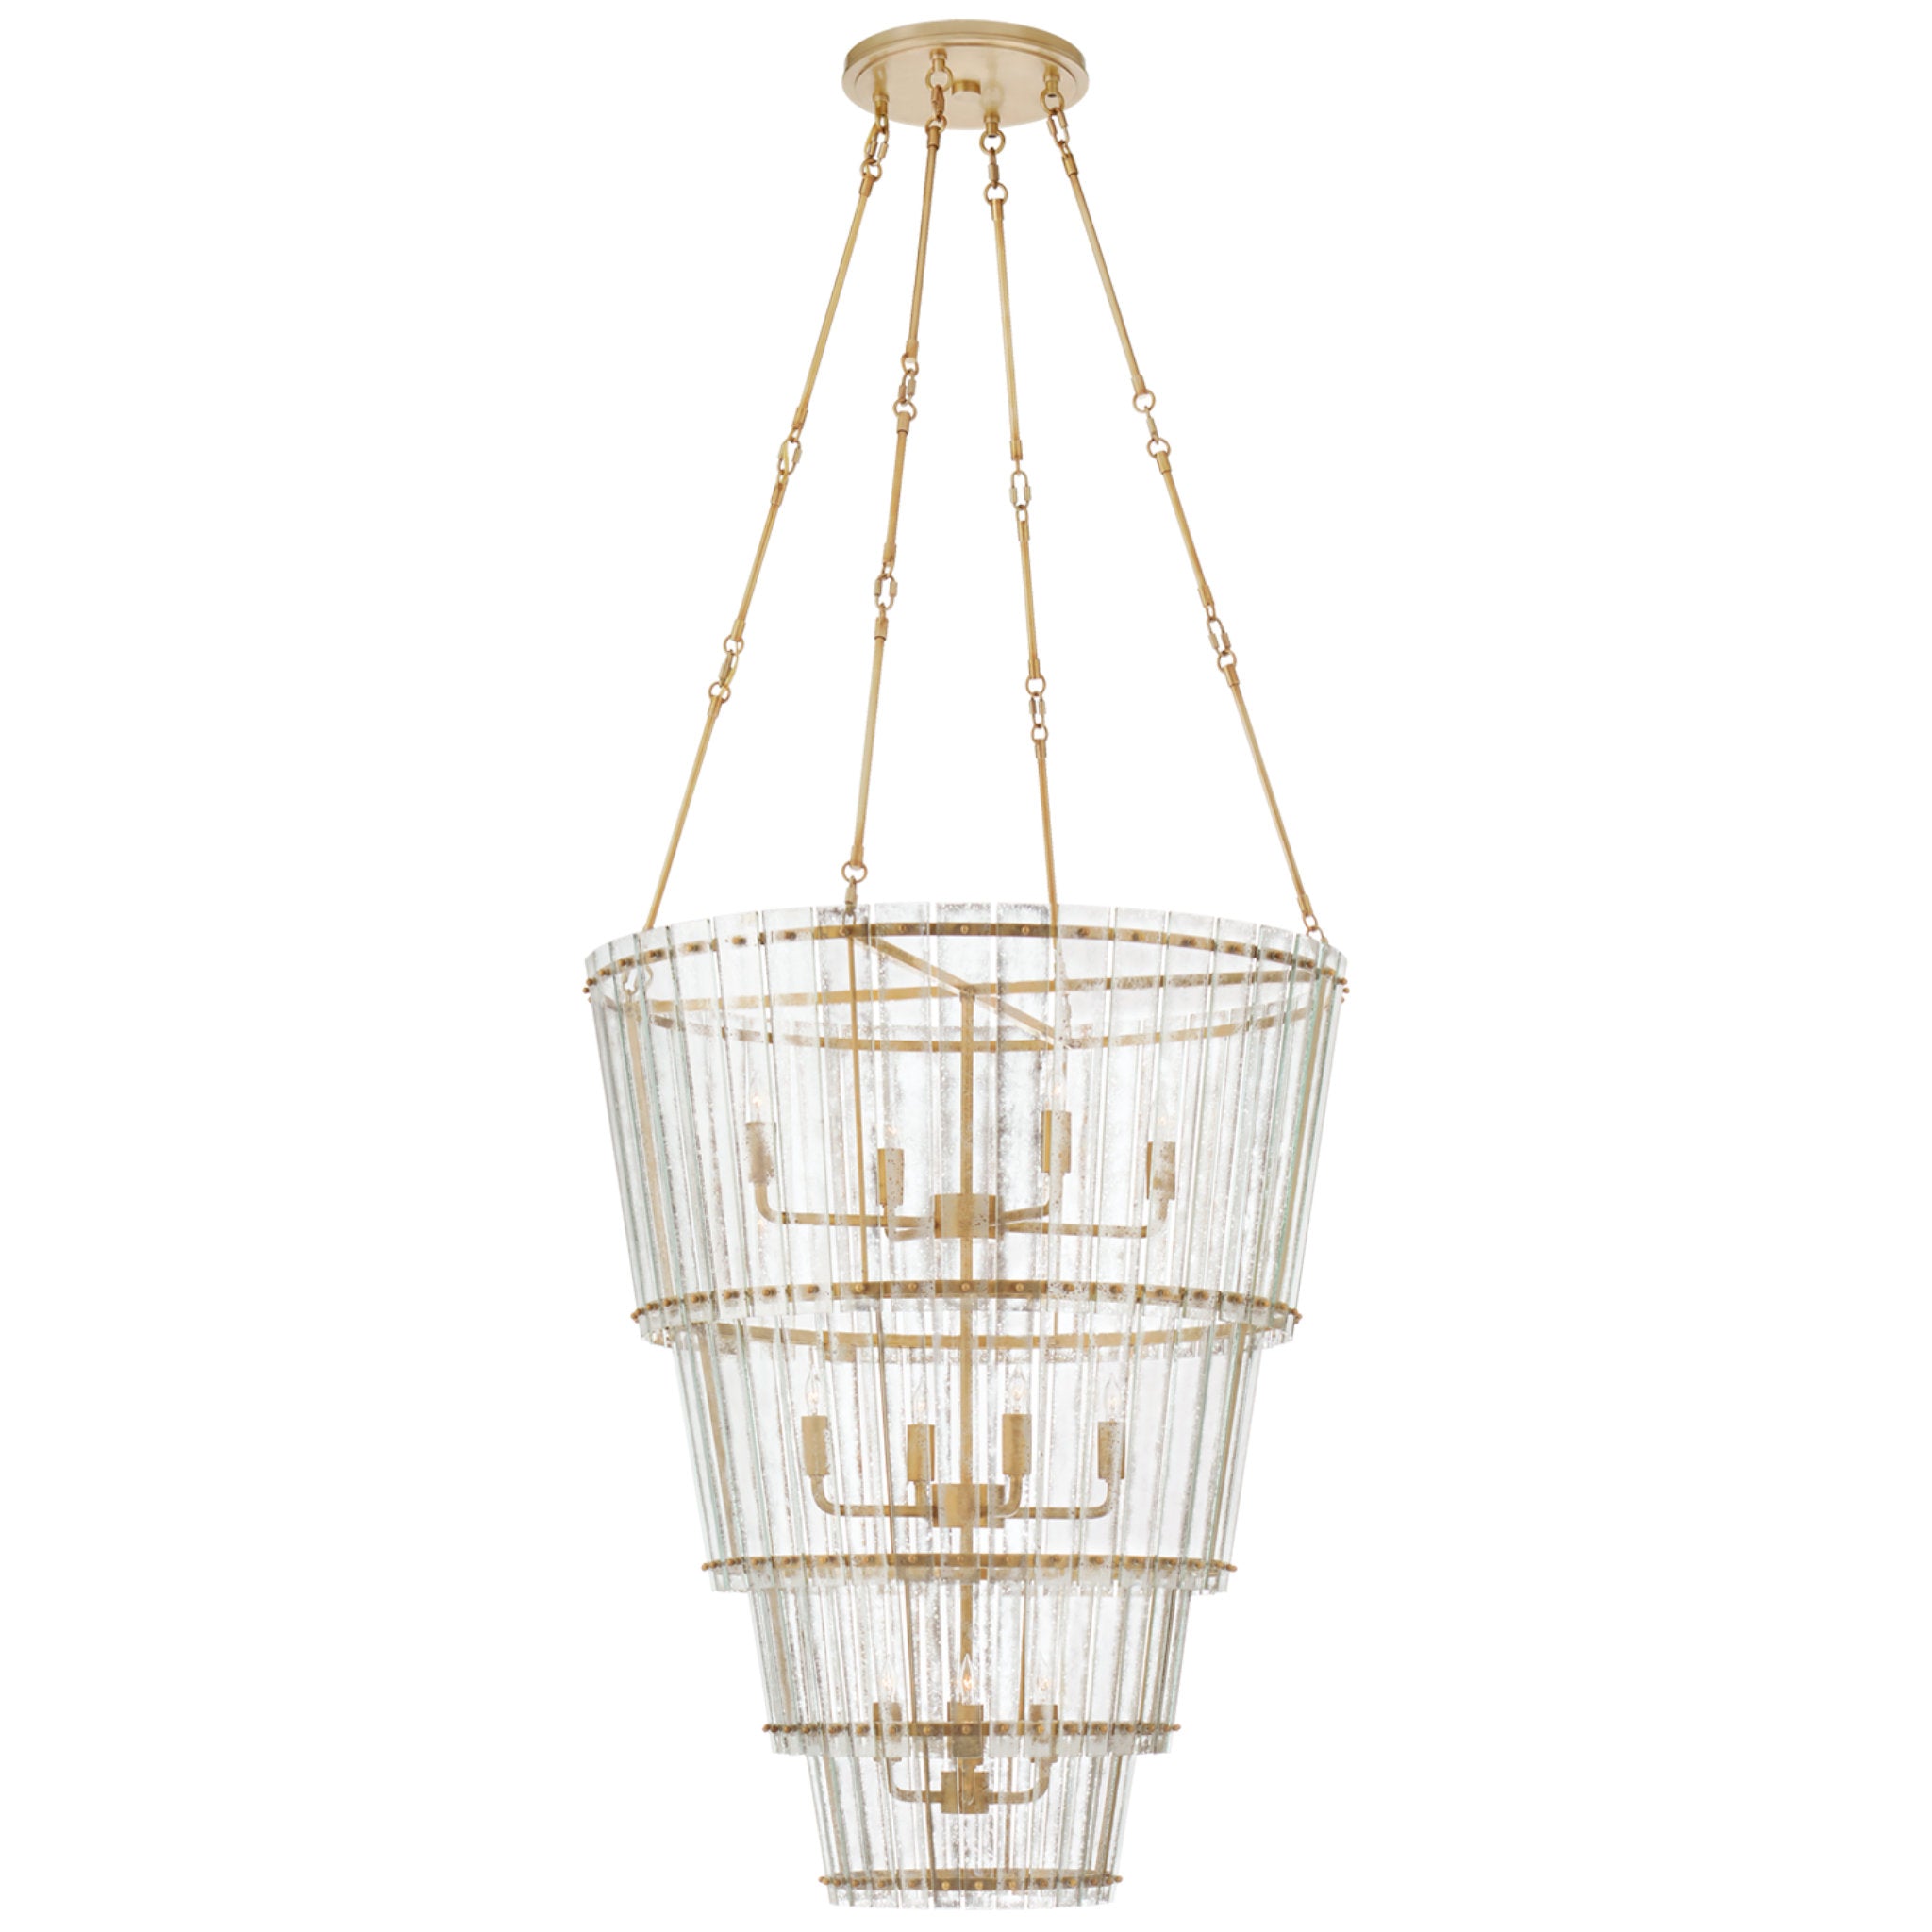 Carrier and Company Cadence Large Waterfall Chandelier in Hand-Rubbed Antique Brass with Antique Mirror